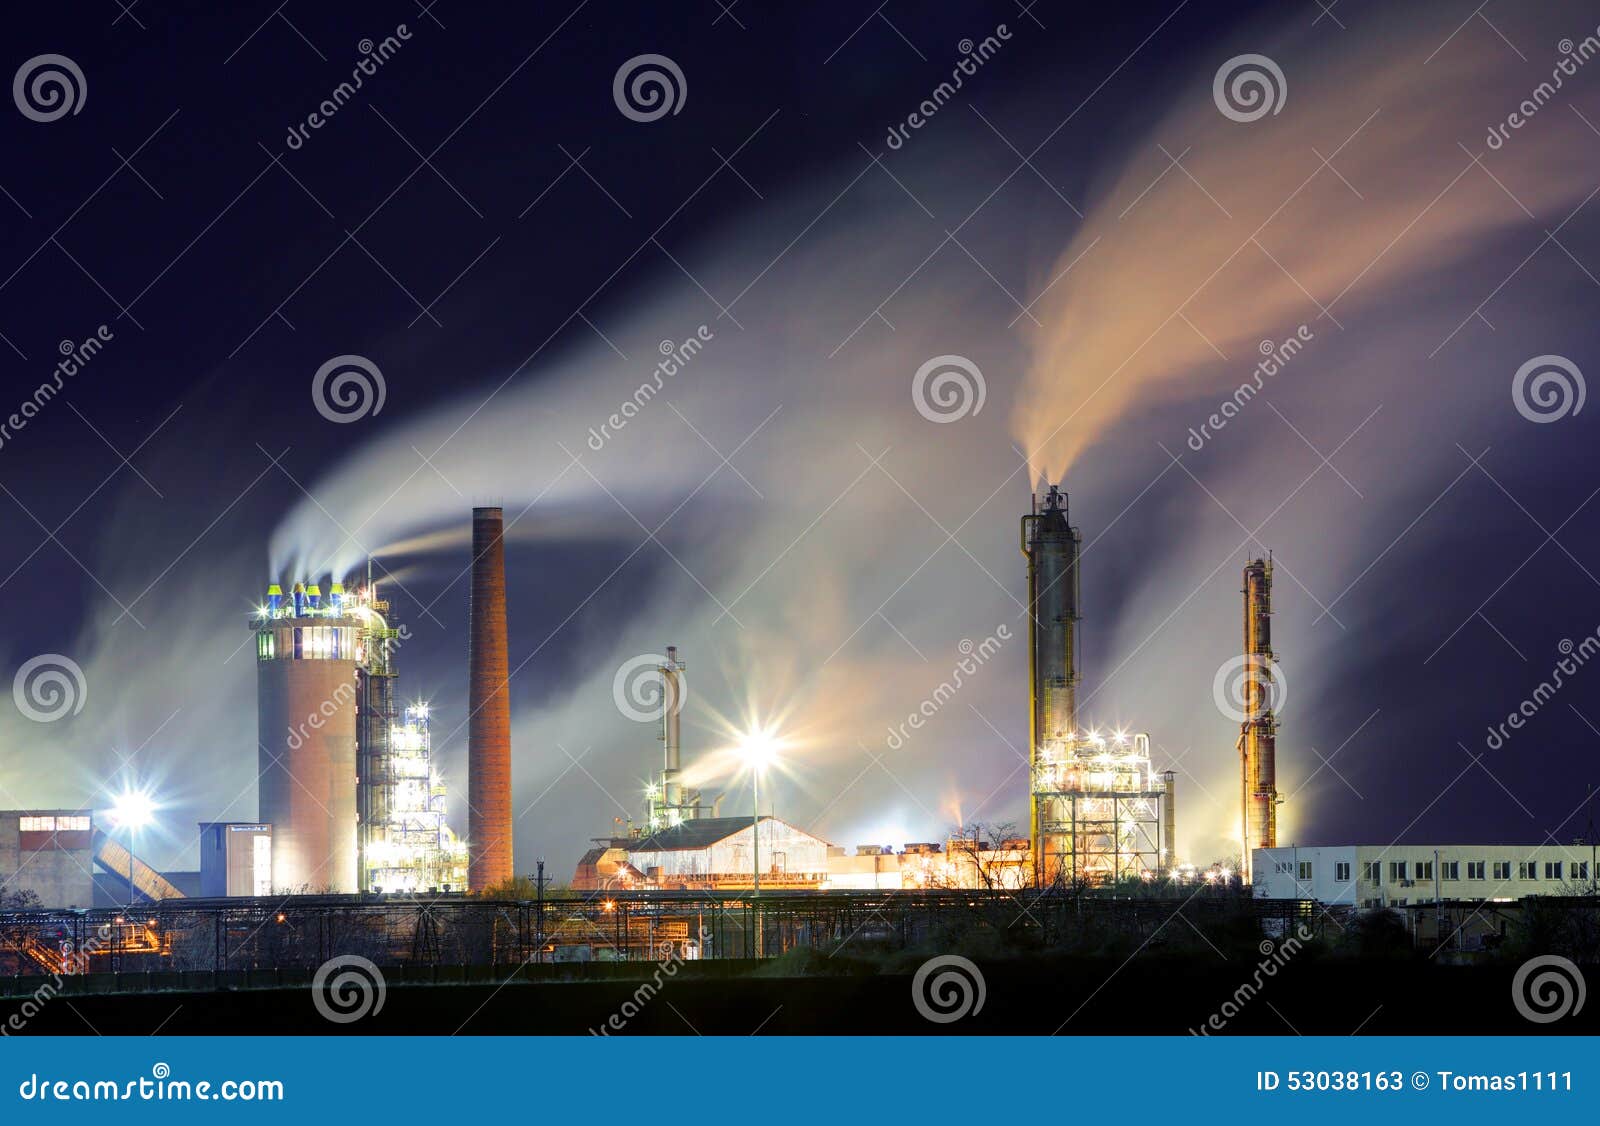 oil refinery with vapor - petrochemical industry at night